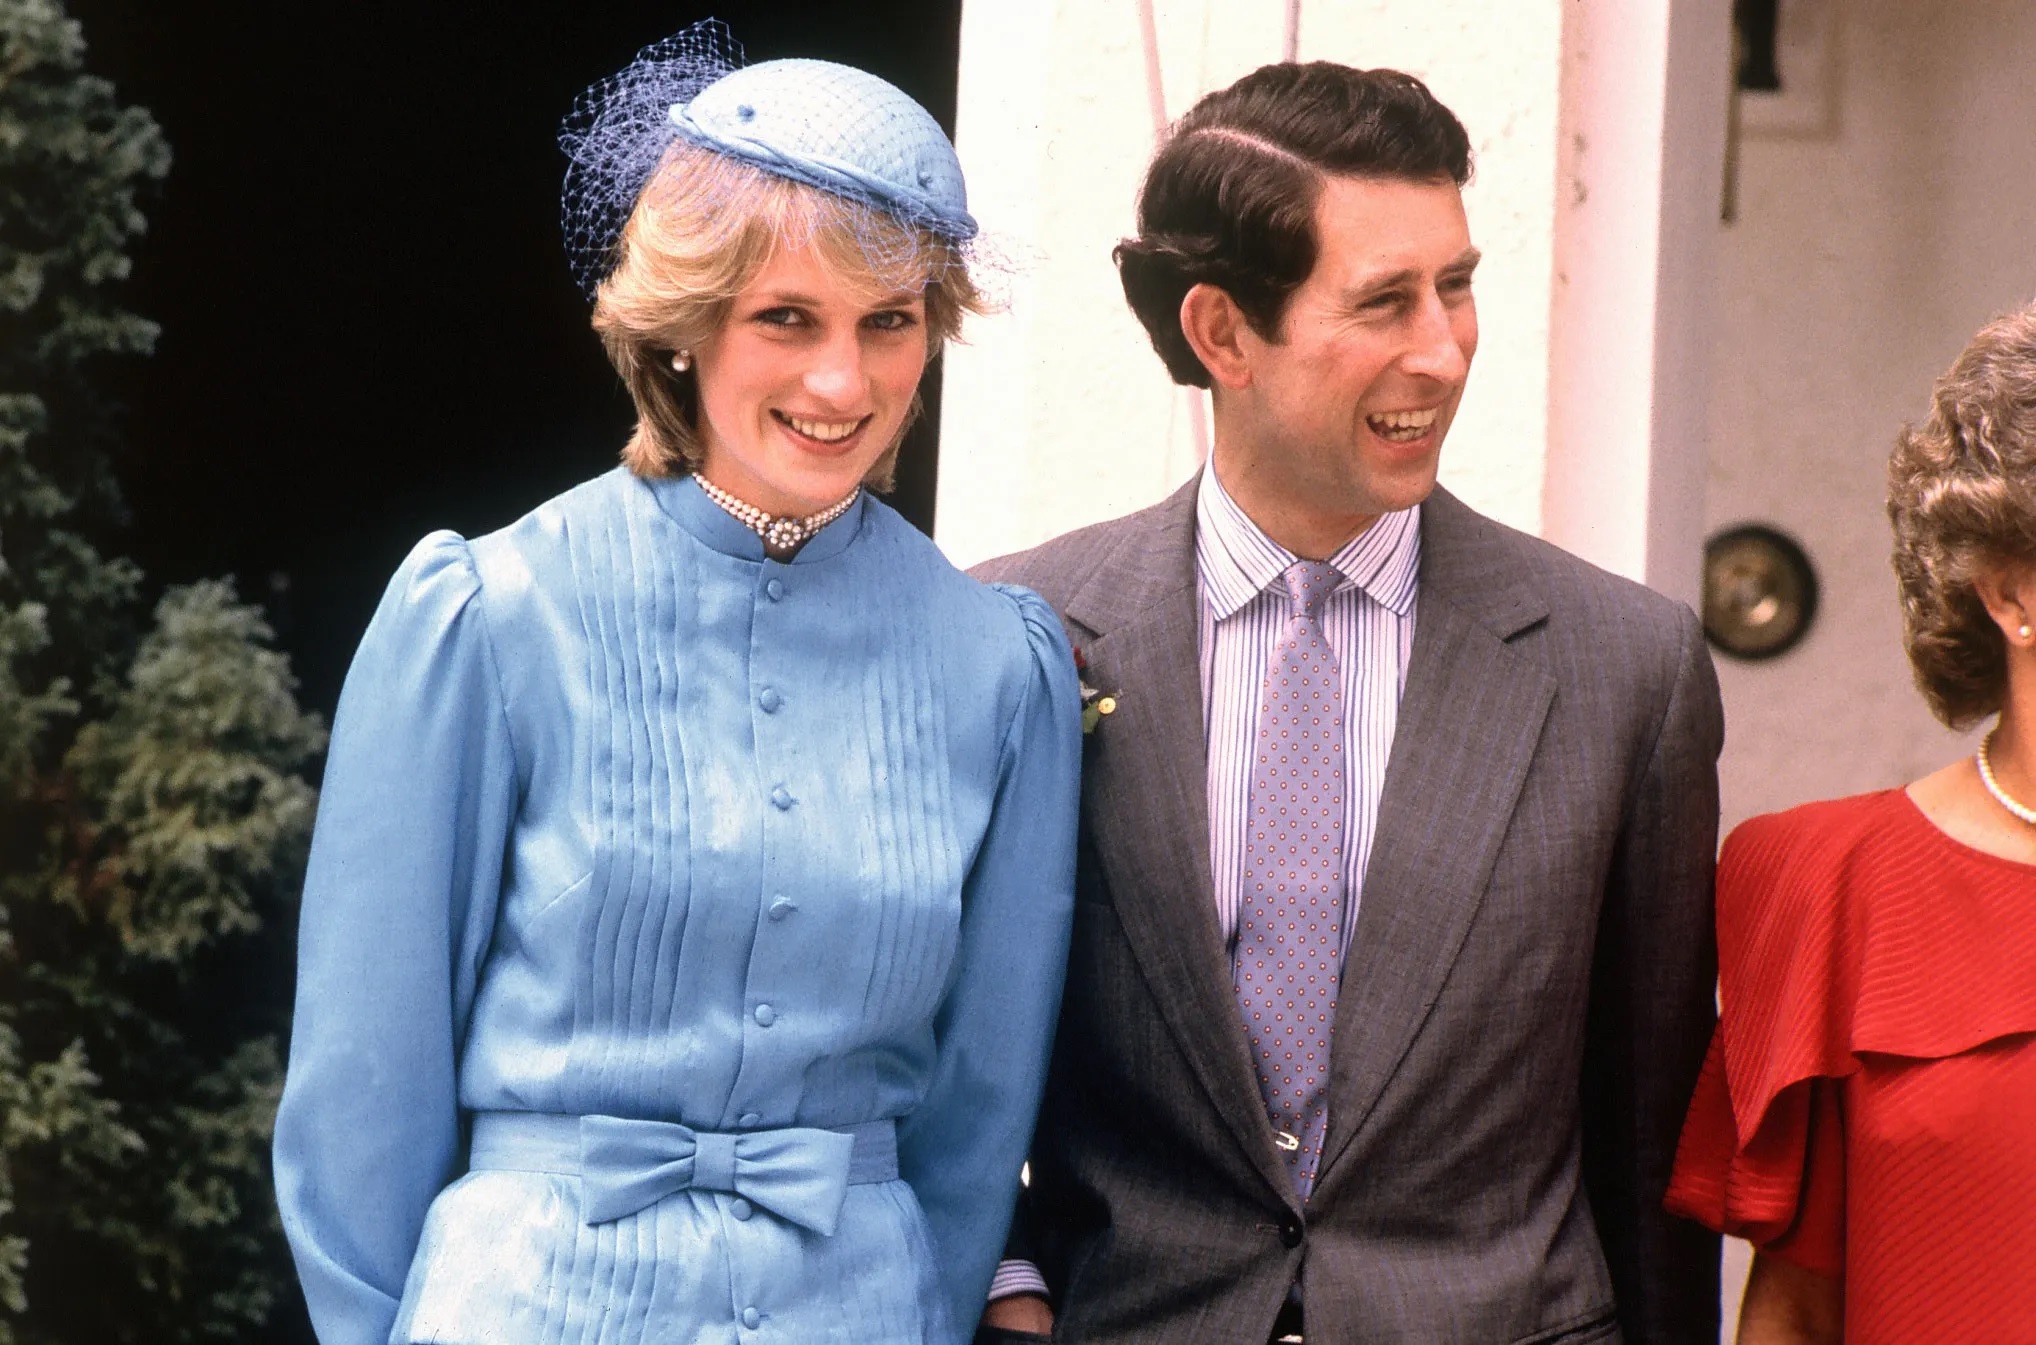 Has King Charles 111 Ever Visited Princess Diana’s Grave?